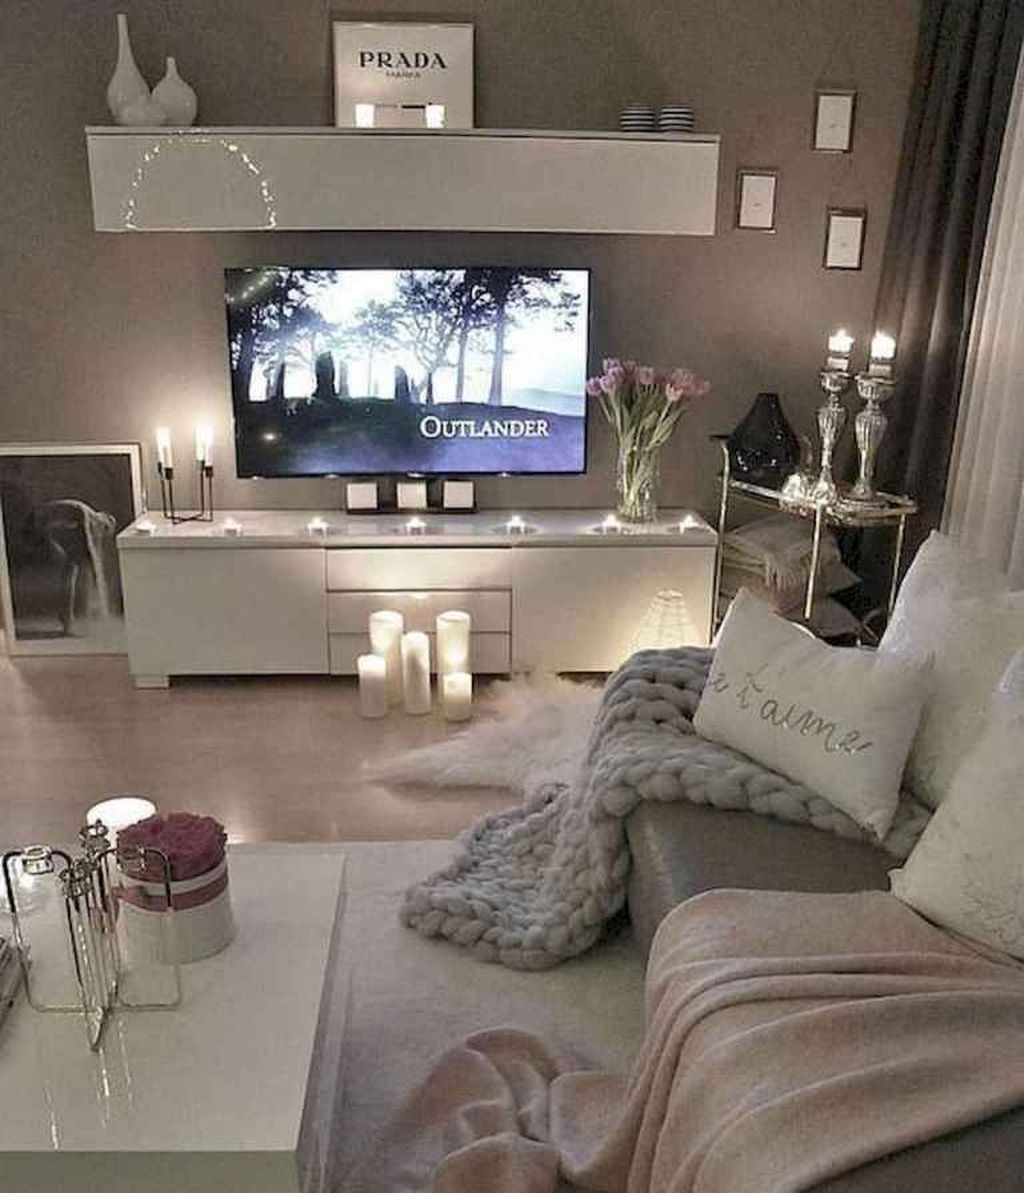 Splendid Apartment Decorating Ideas On A Budget To Try Asap 16